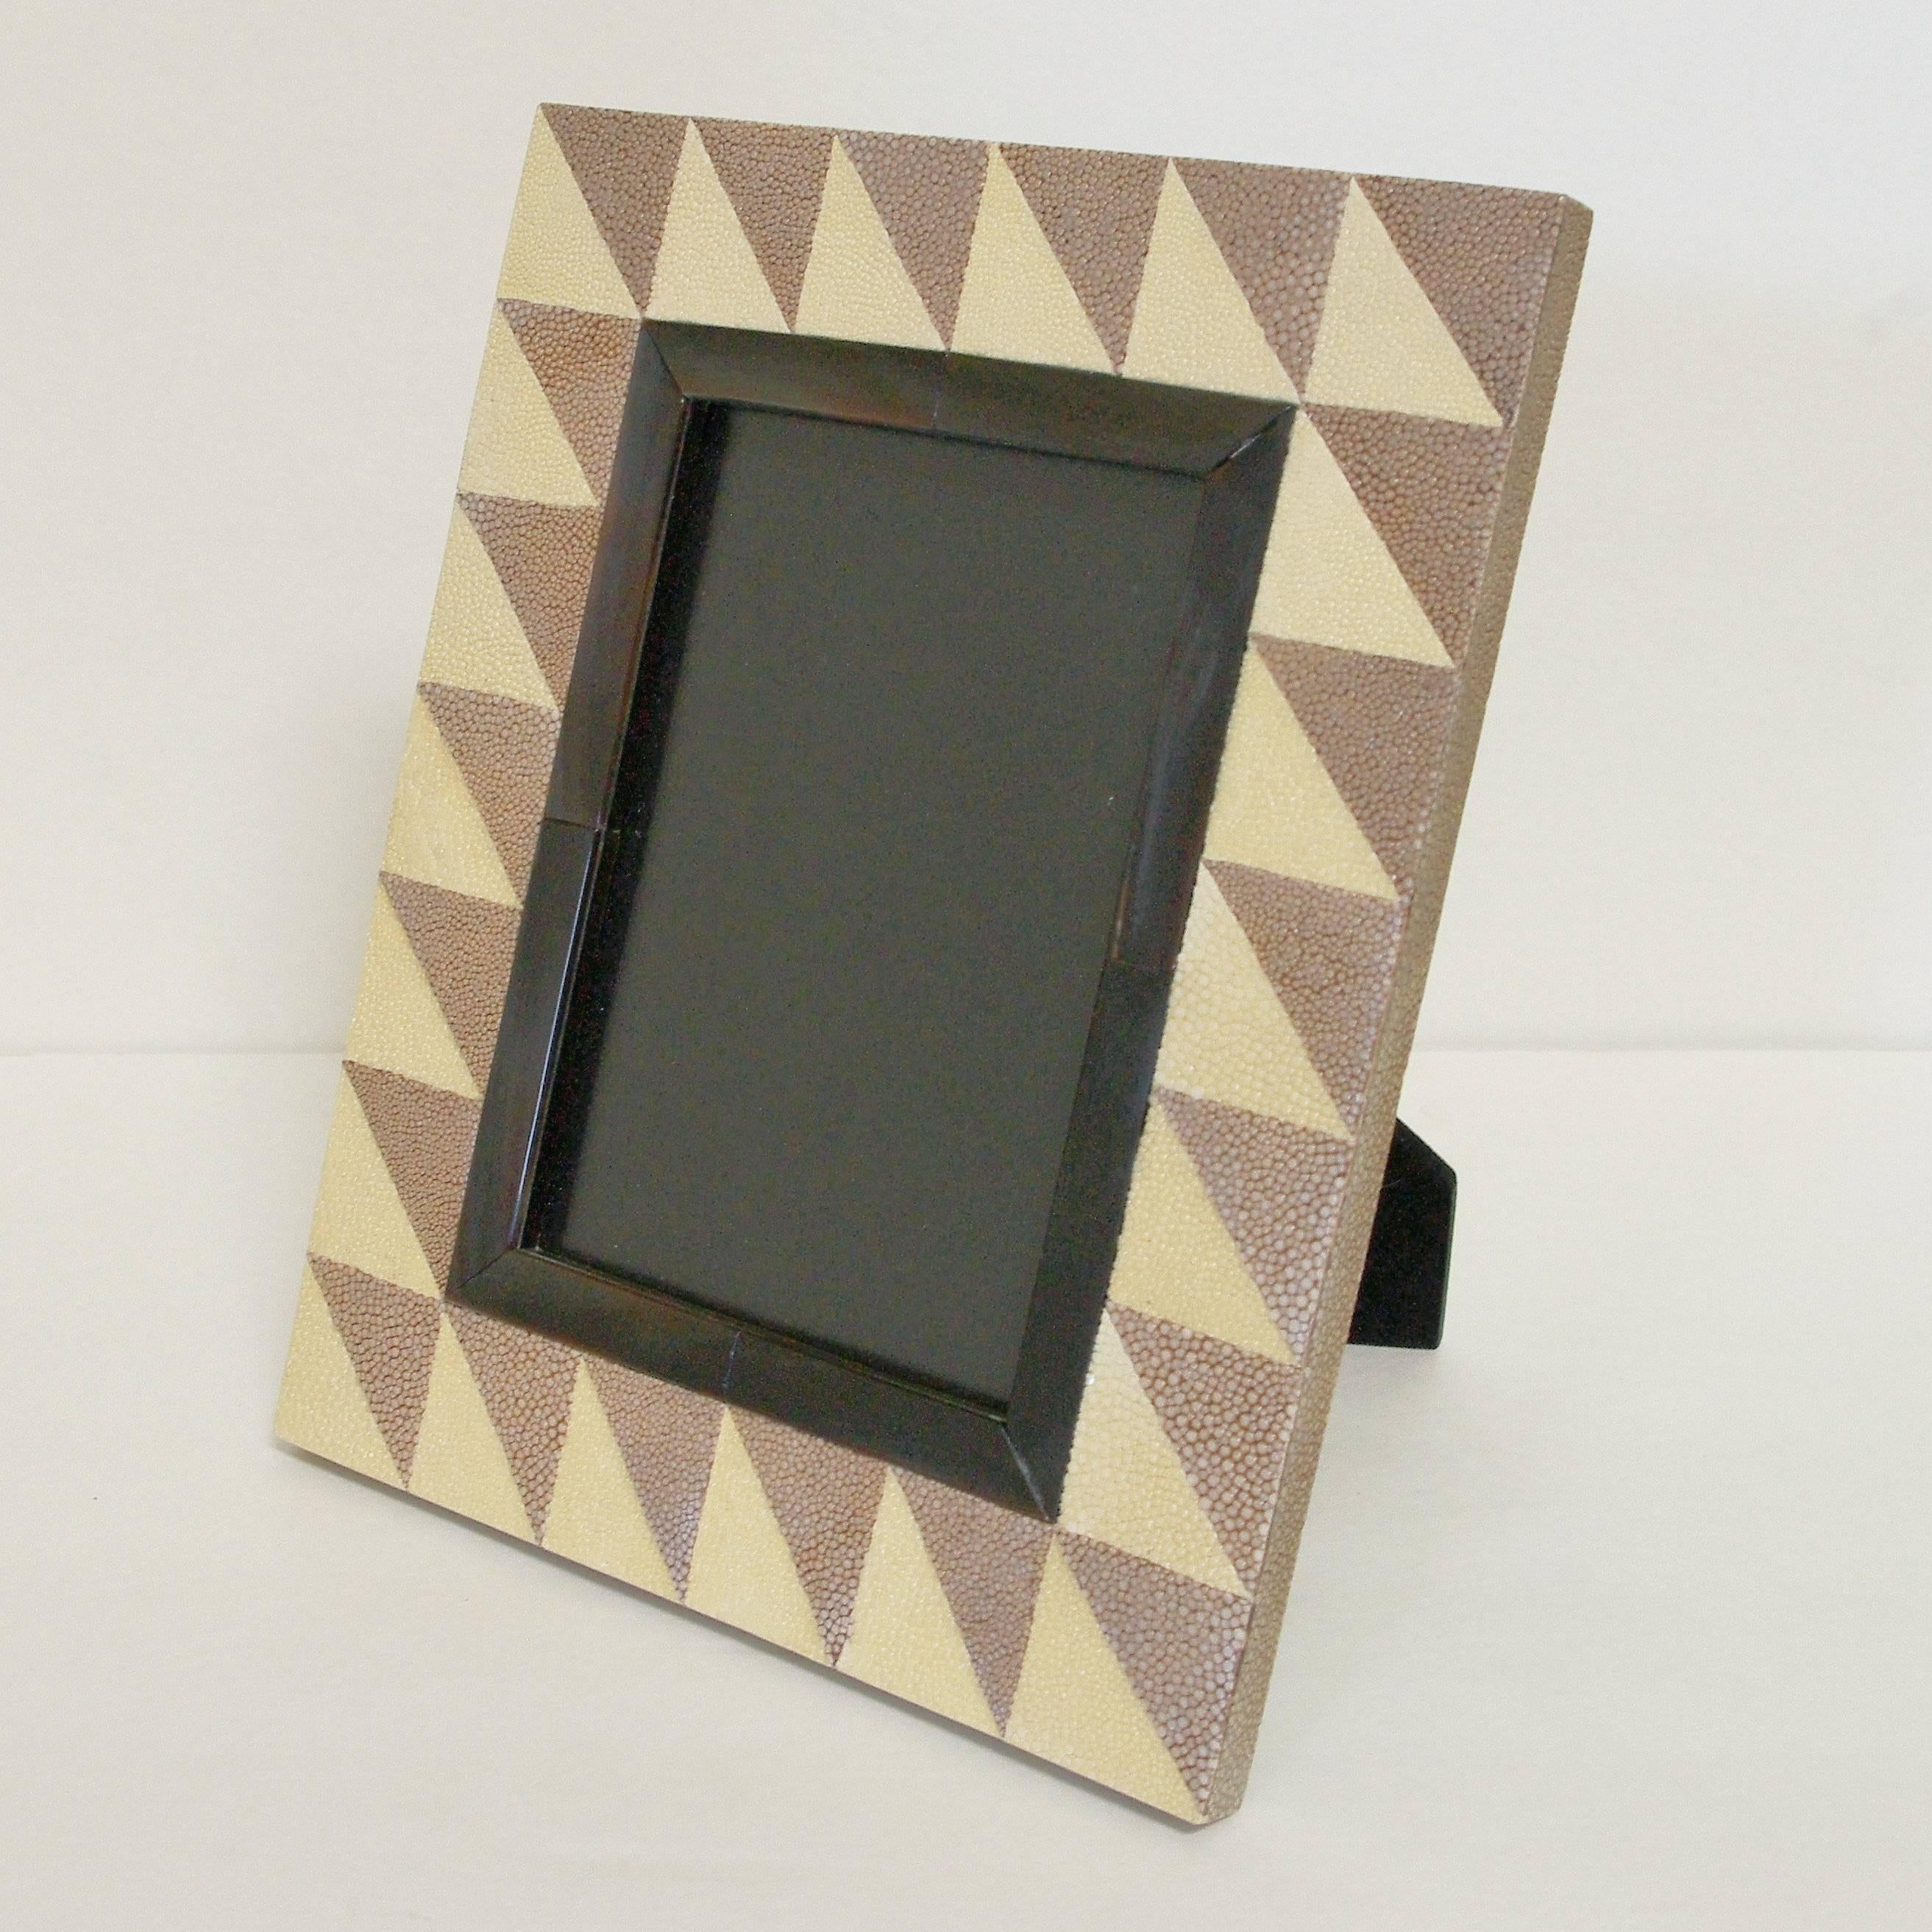 Ivory and brown shagreen leather and brown horn photo frame by Fabio Ltd 
Height: 9.5 inches / Width: 8.5 inches / Depth: 6.5 inches
Photo Size: 5 inches by 7 inches
1 in stock in Palm Springs currently ON 30% OFF SALE for $413 !!!
Order Reference